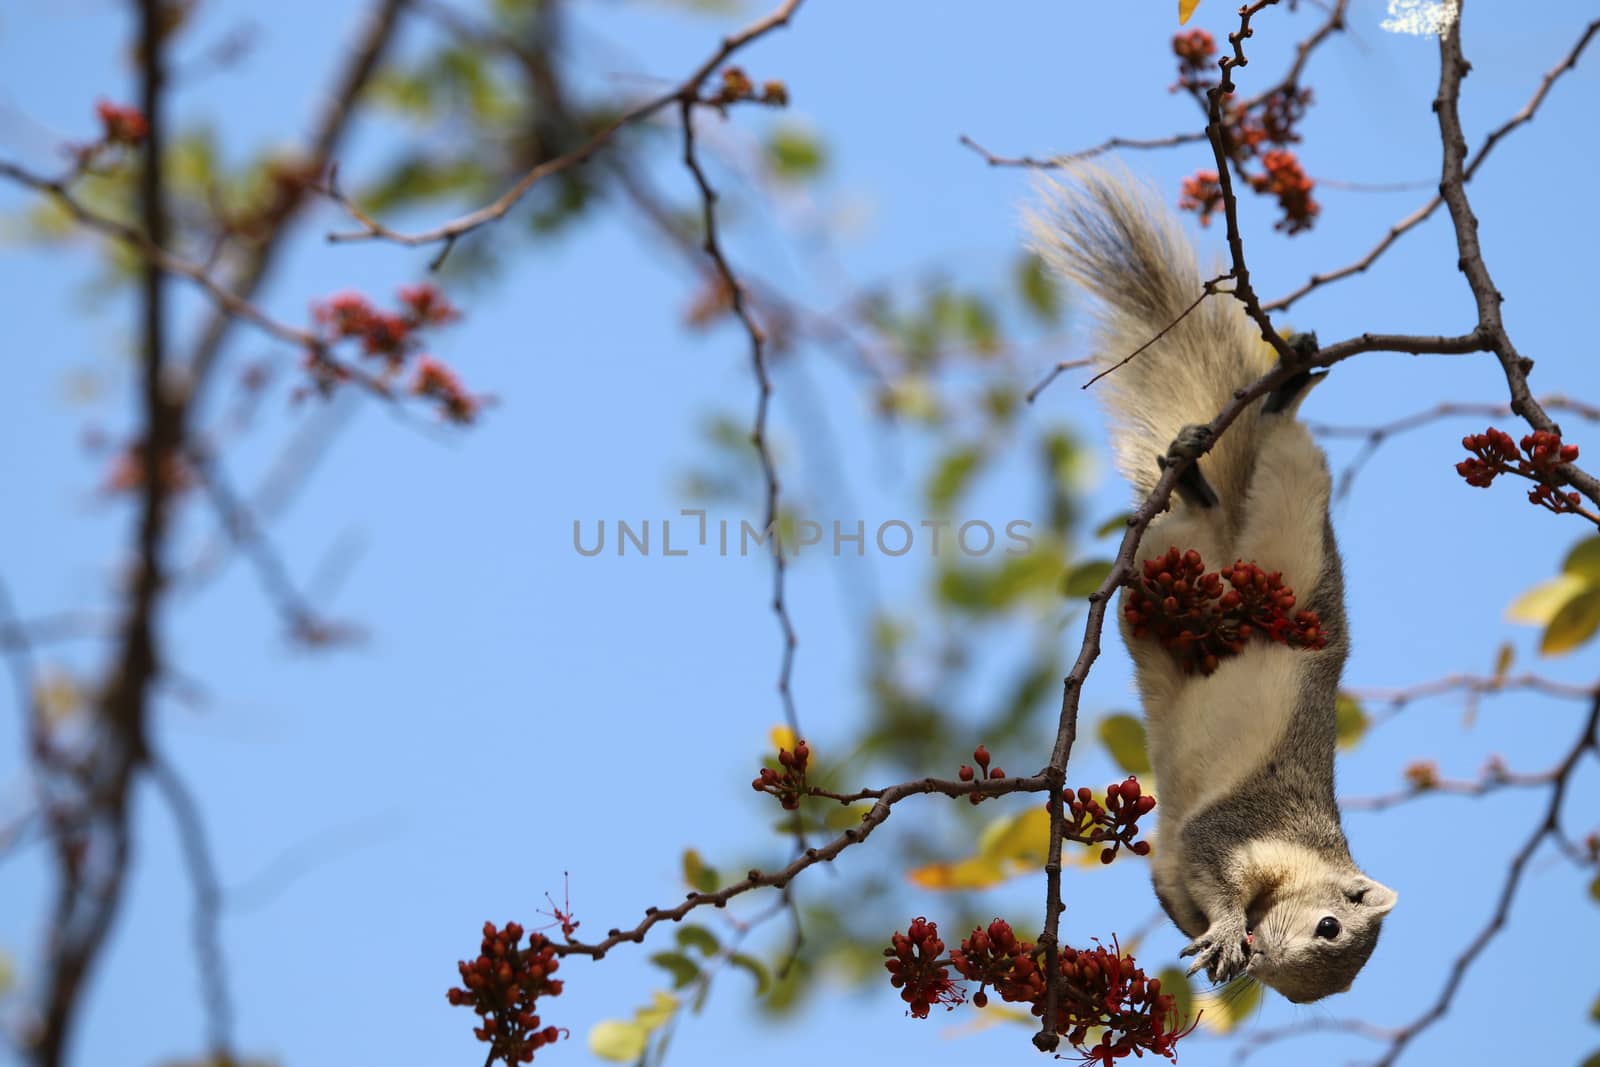 Cute squirrel white and gray color eating fruit and red flowers by louisnina